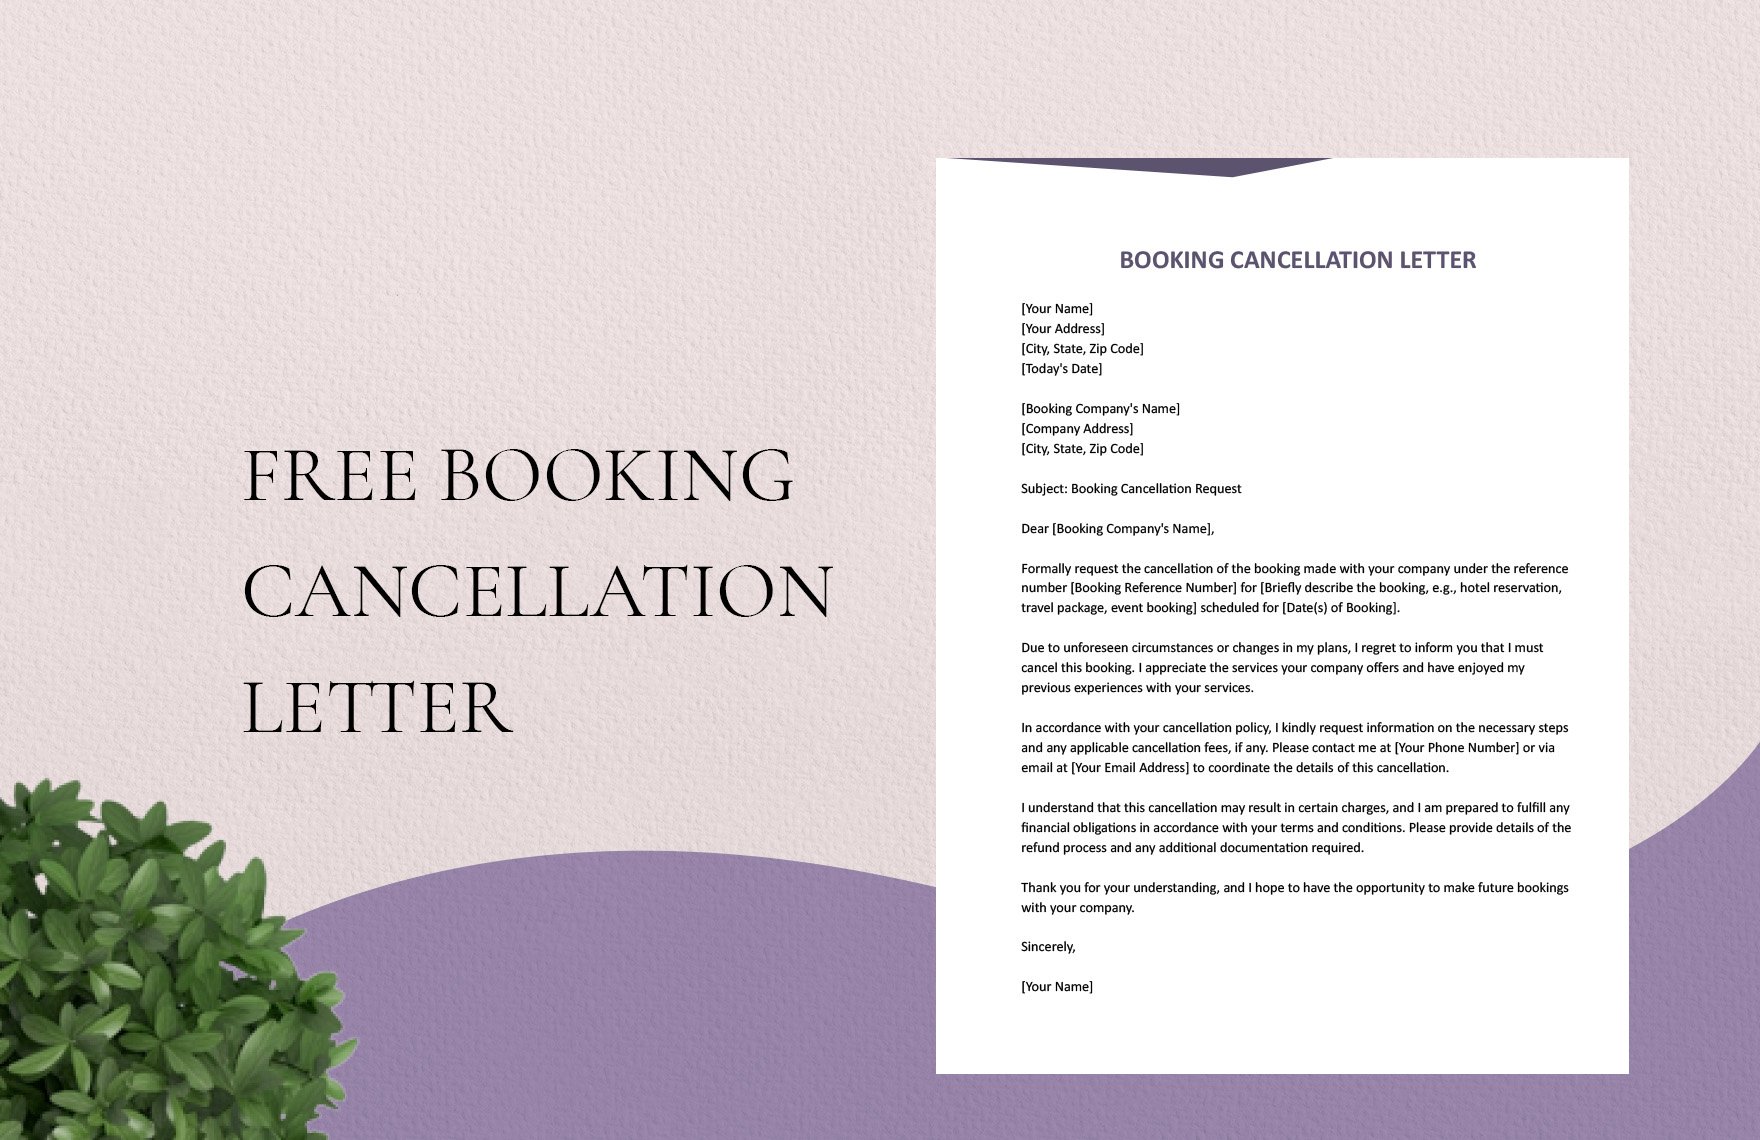 Booking Cancellation Letter